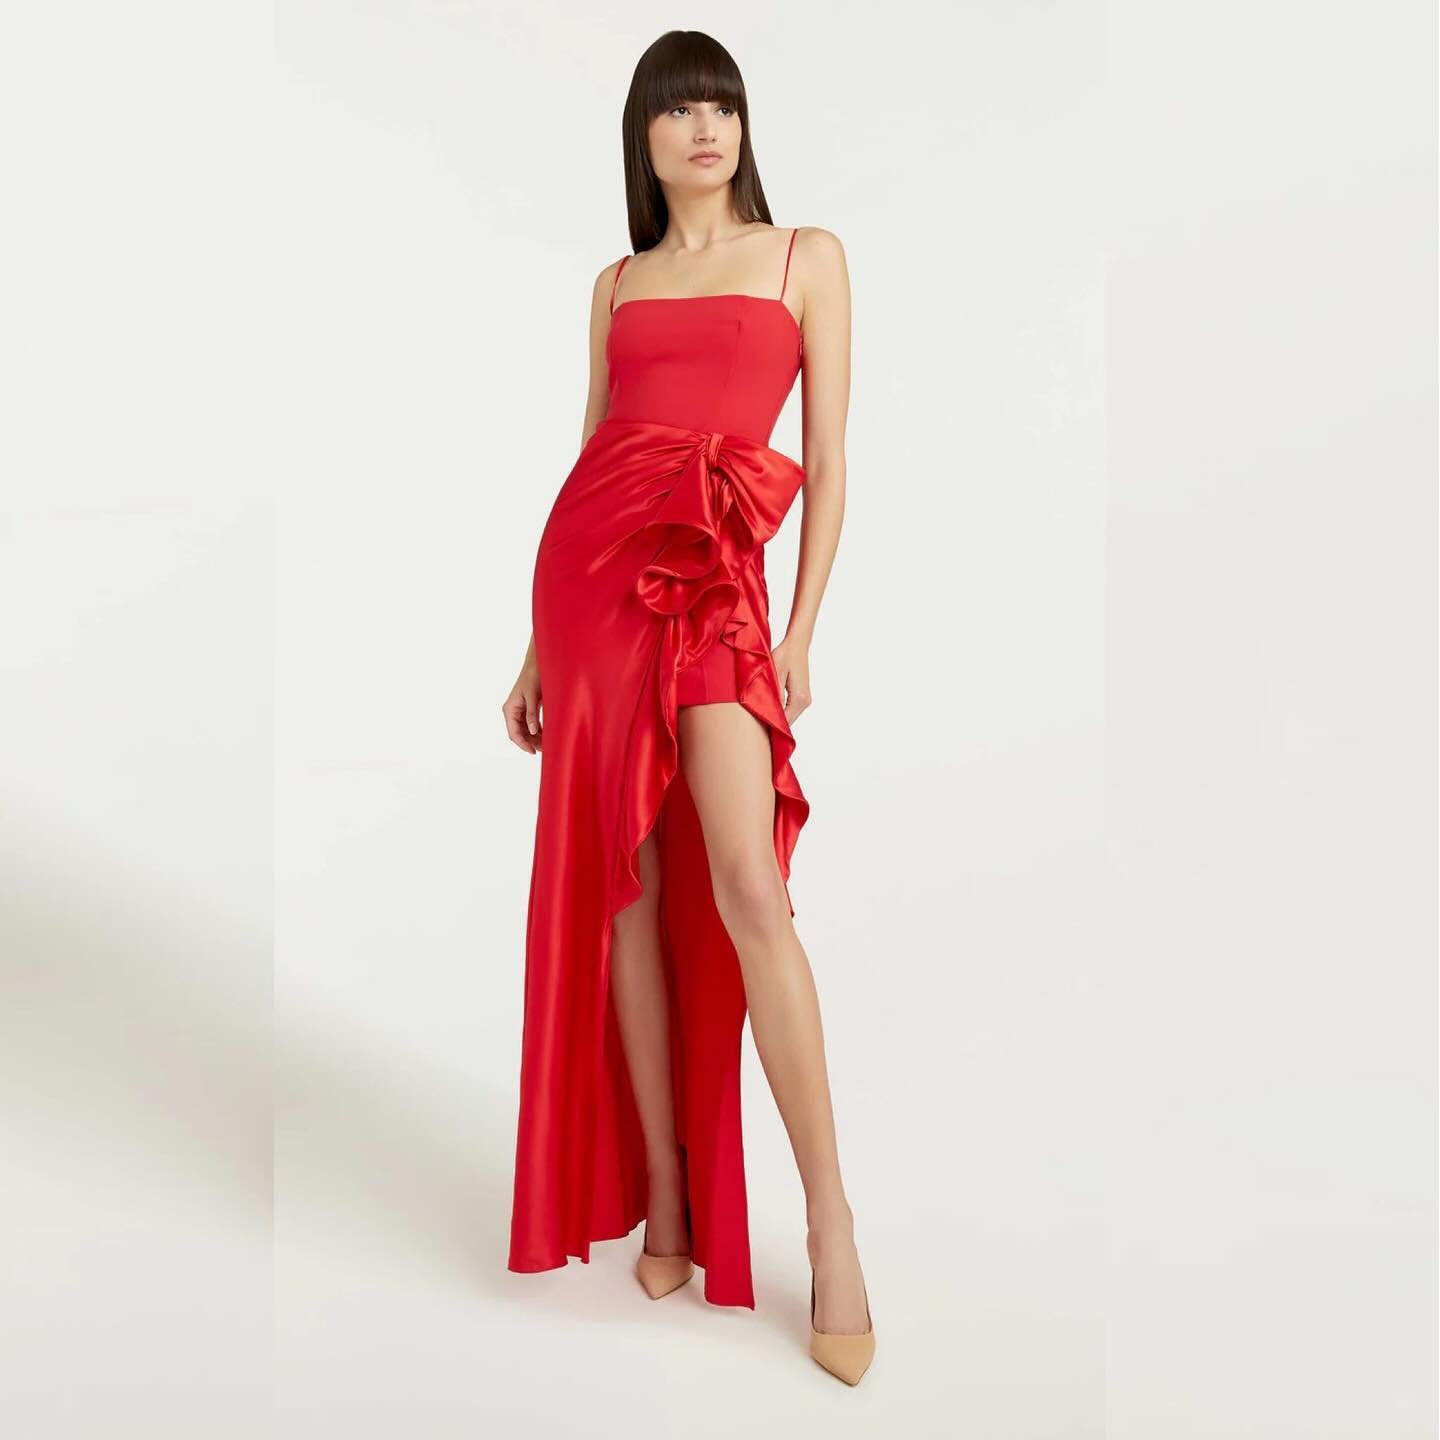 Add some spice to your life with this gorgeous gown by @cinqasept in Pimento red 🌶️
.
.
.
.
.
.
.
.
.
#MontrealFashion #DressRentalMontreal #RentTheLook #MontrealStyle #MontrealDresses #FashionForRent #MontrealChic #RentDressRepeat #MontrealGlam